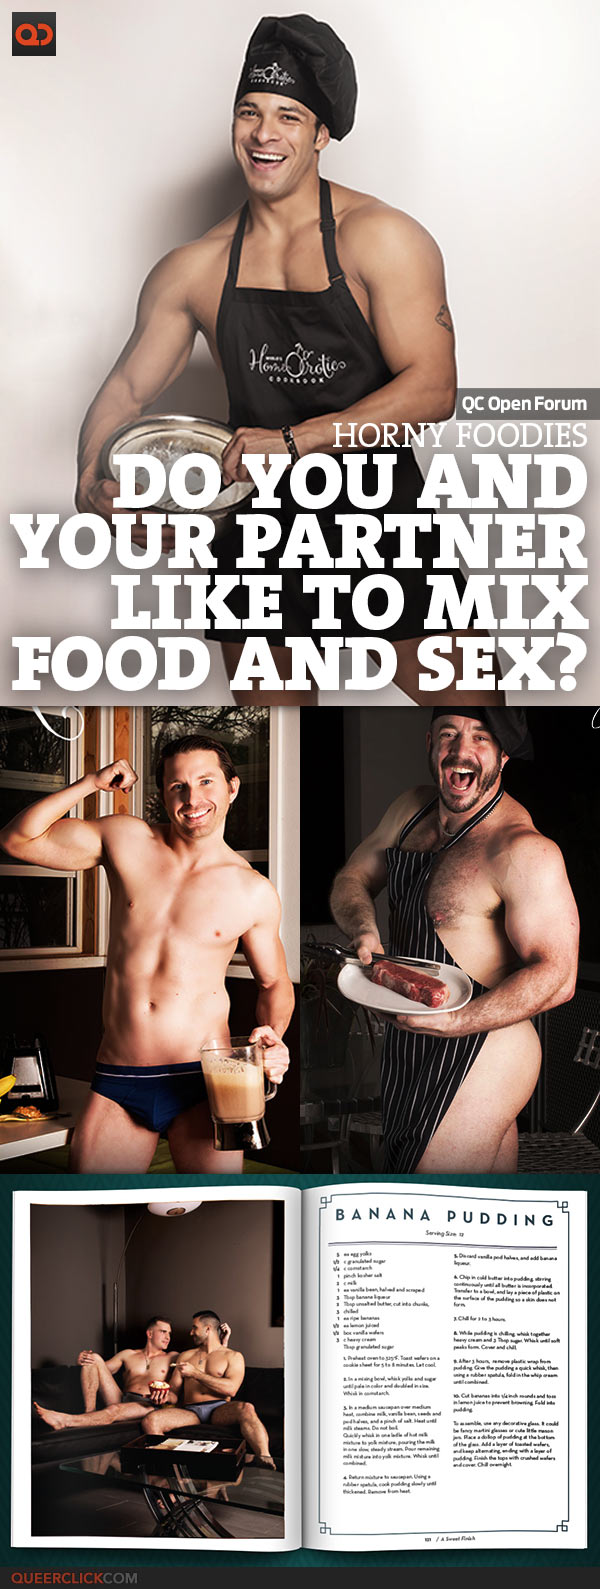 Qc Open Forum: Horny Foodies - Do You And Your Partner Like To Mix Food And Sex?